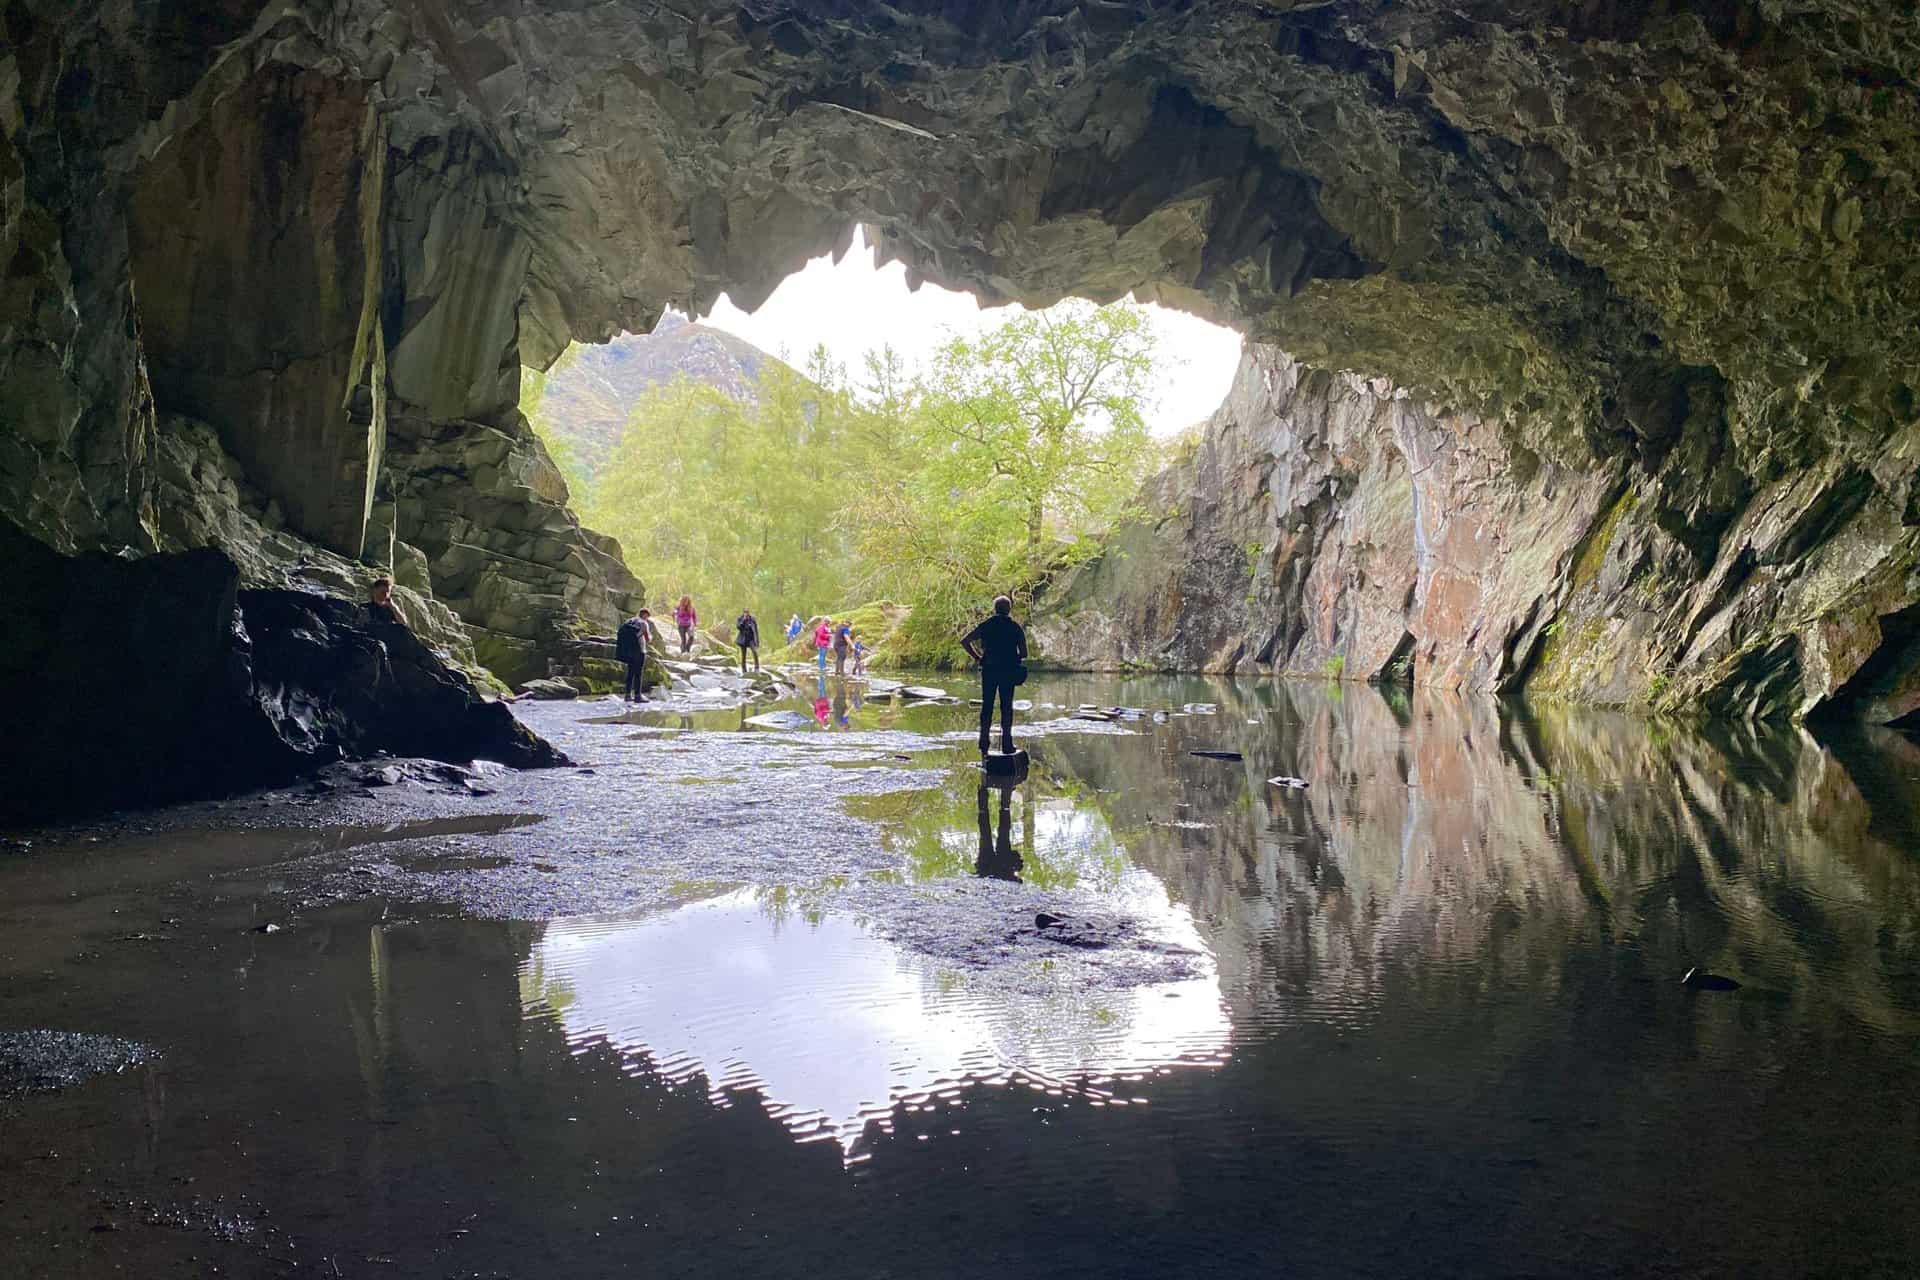 Rydal Cave. A man-made cave on the site of a former slate quarry, with stepping stones leading to a partially dry interior. One of the many highlights of the Loughrigg Fell walk.